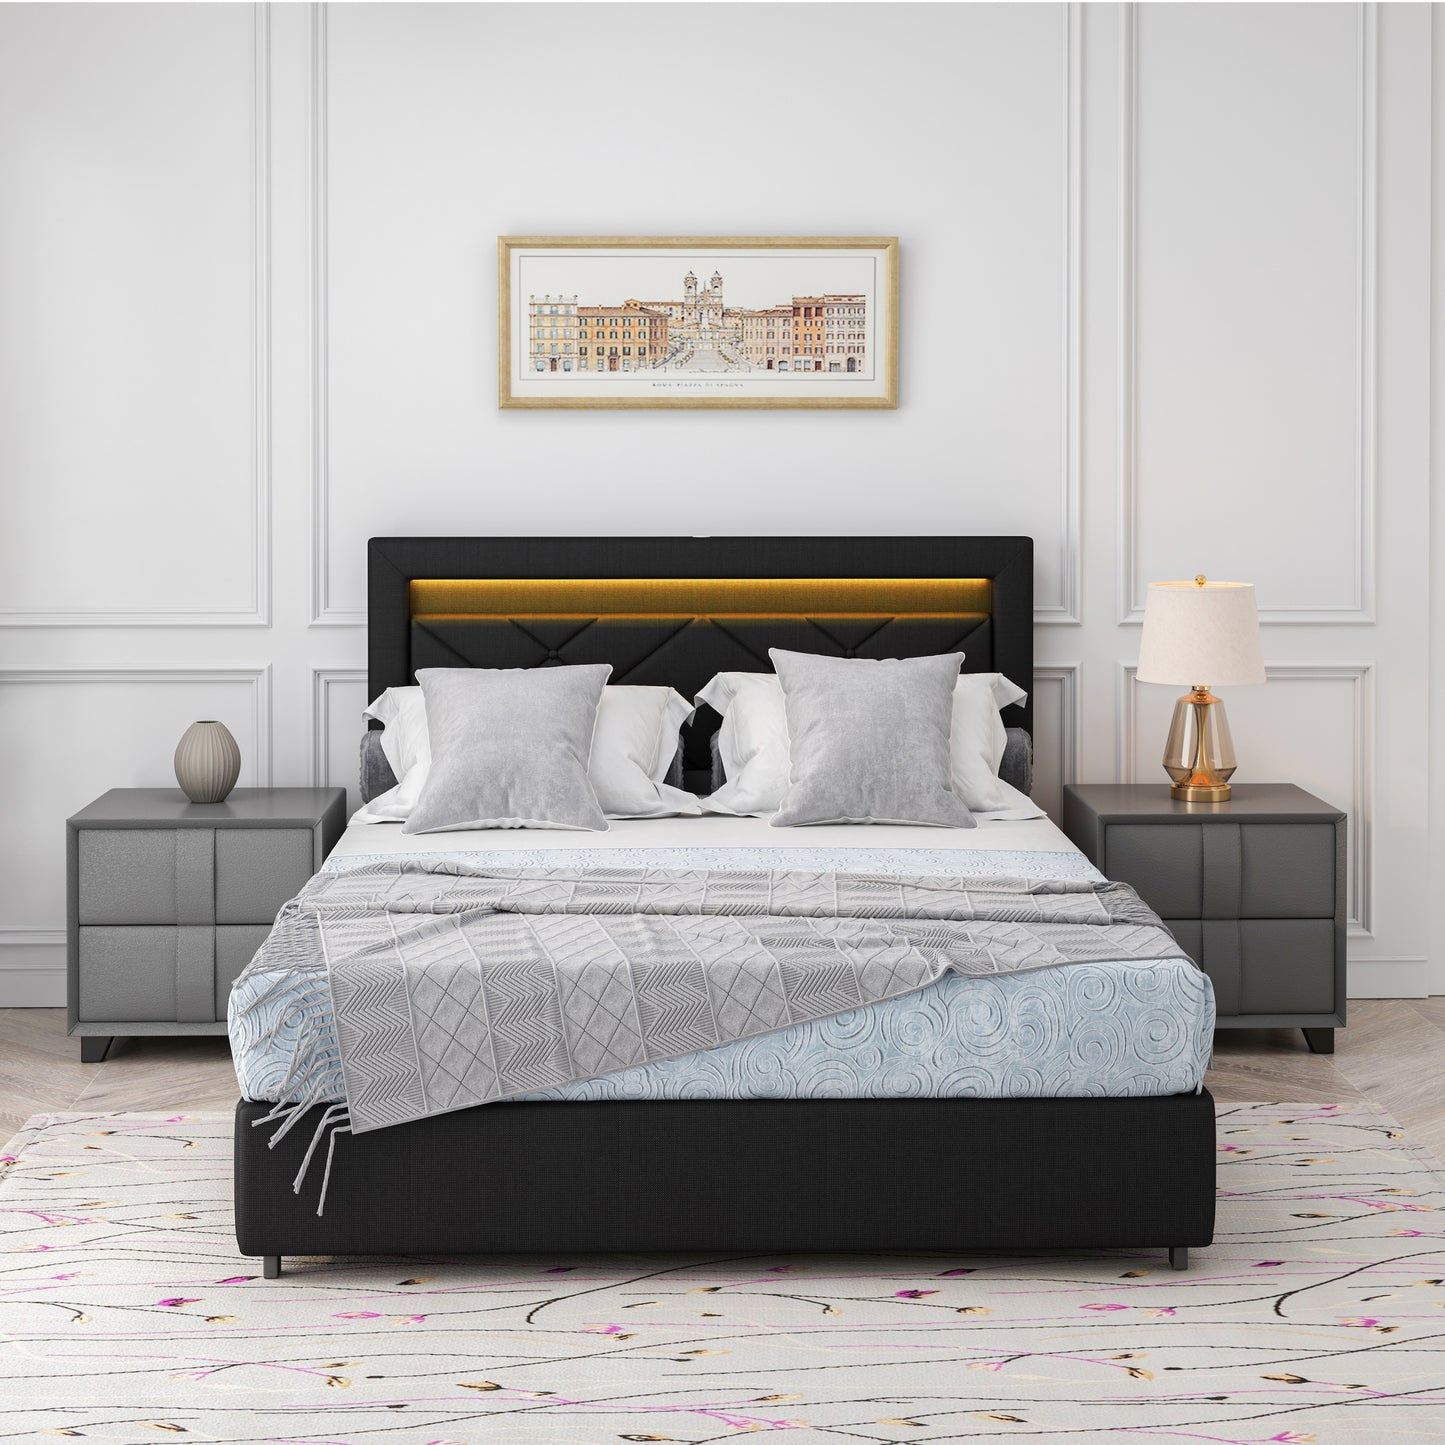 Tully Queen Bed (black)